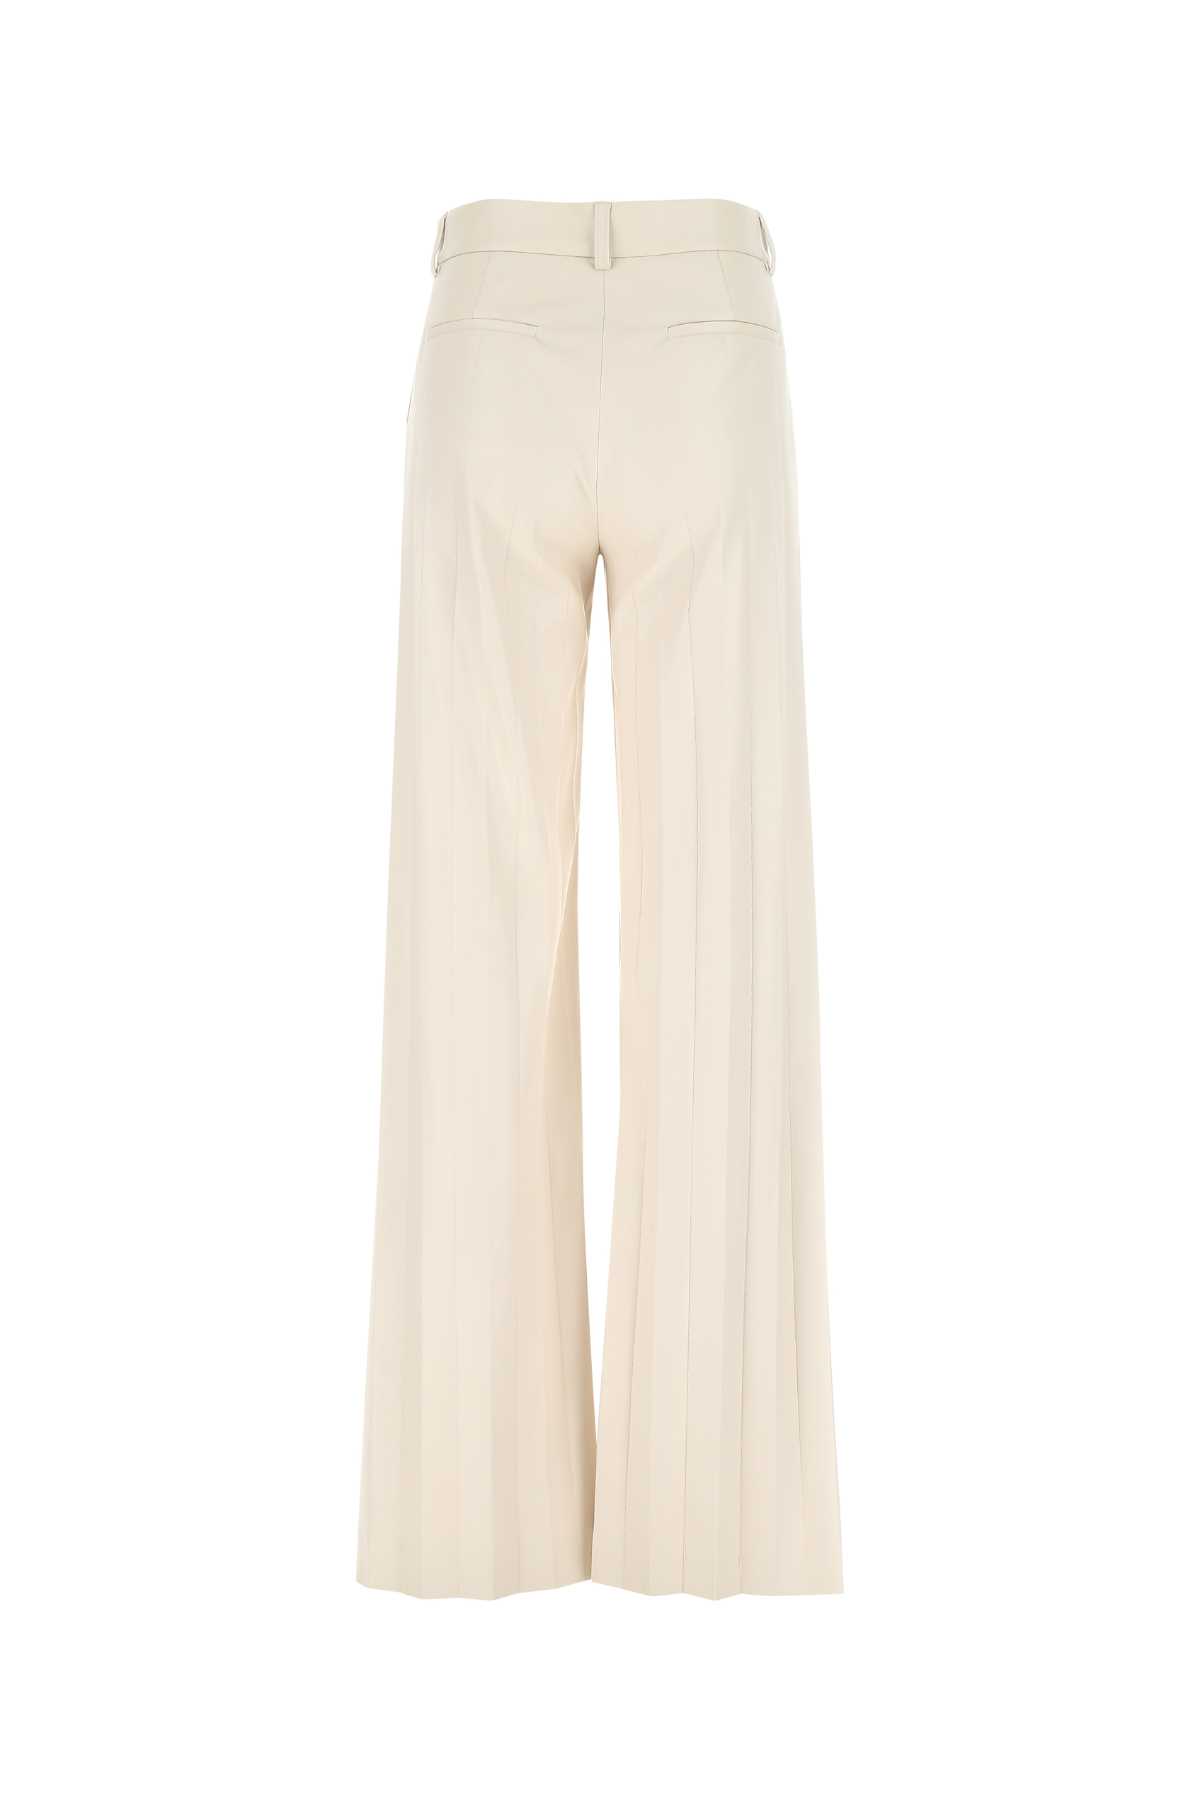 Msgm Ivory Synthetic Leather Pant In 02